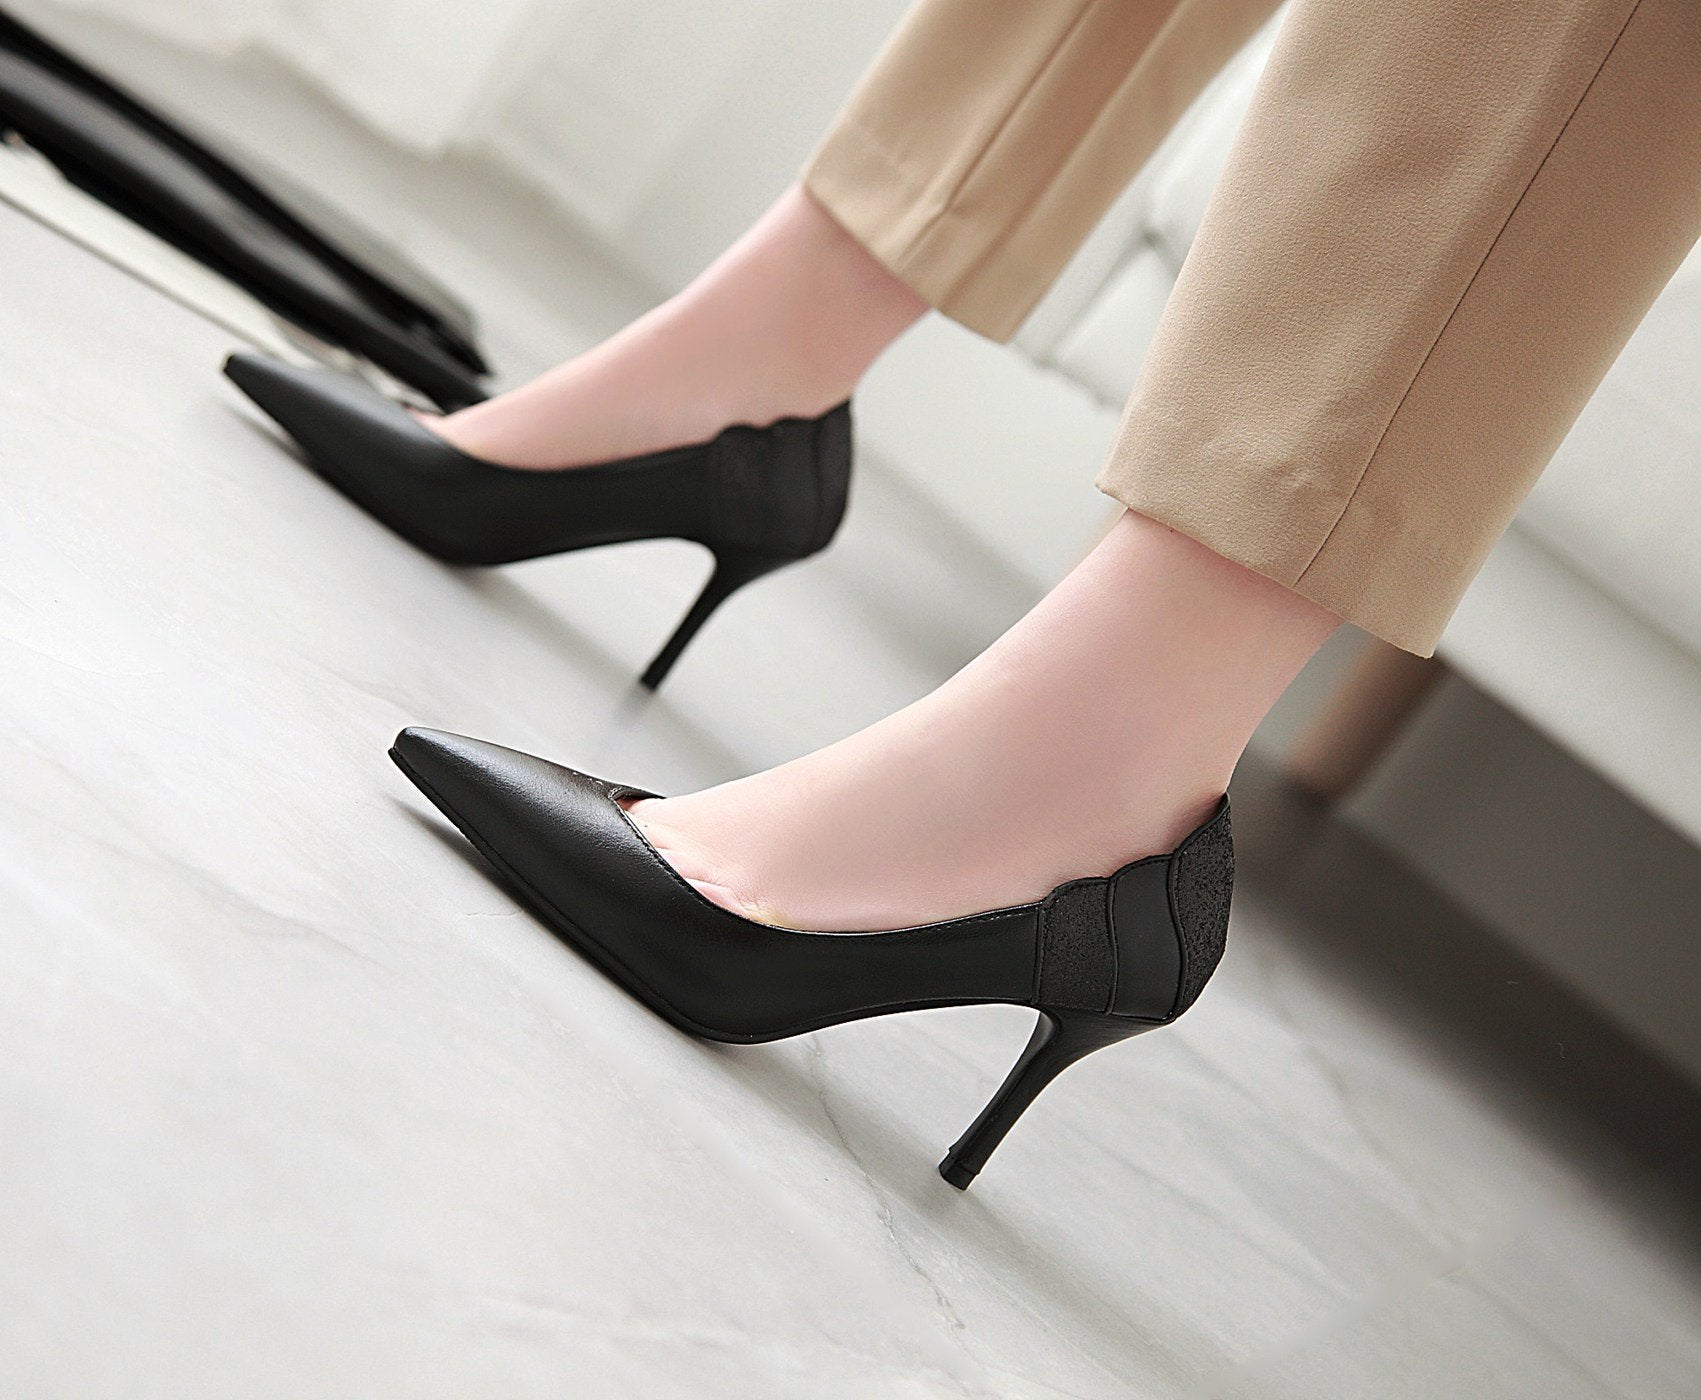 Lady Woman's Shoes High-heeled Shallow Super-fibre Pointed Toe Pumps ...